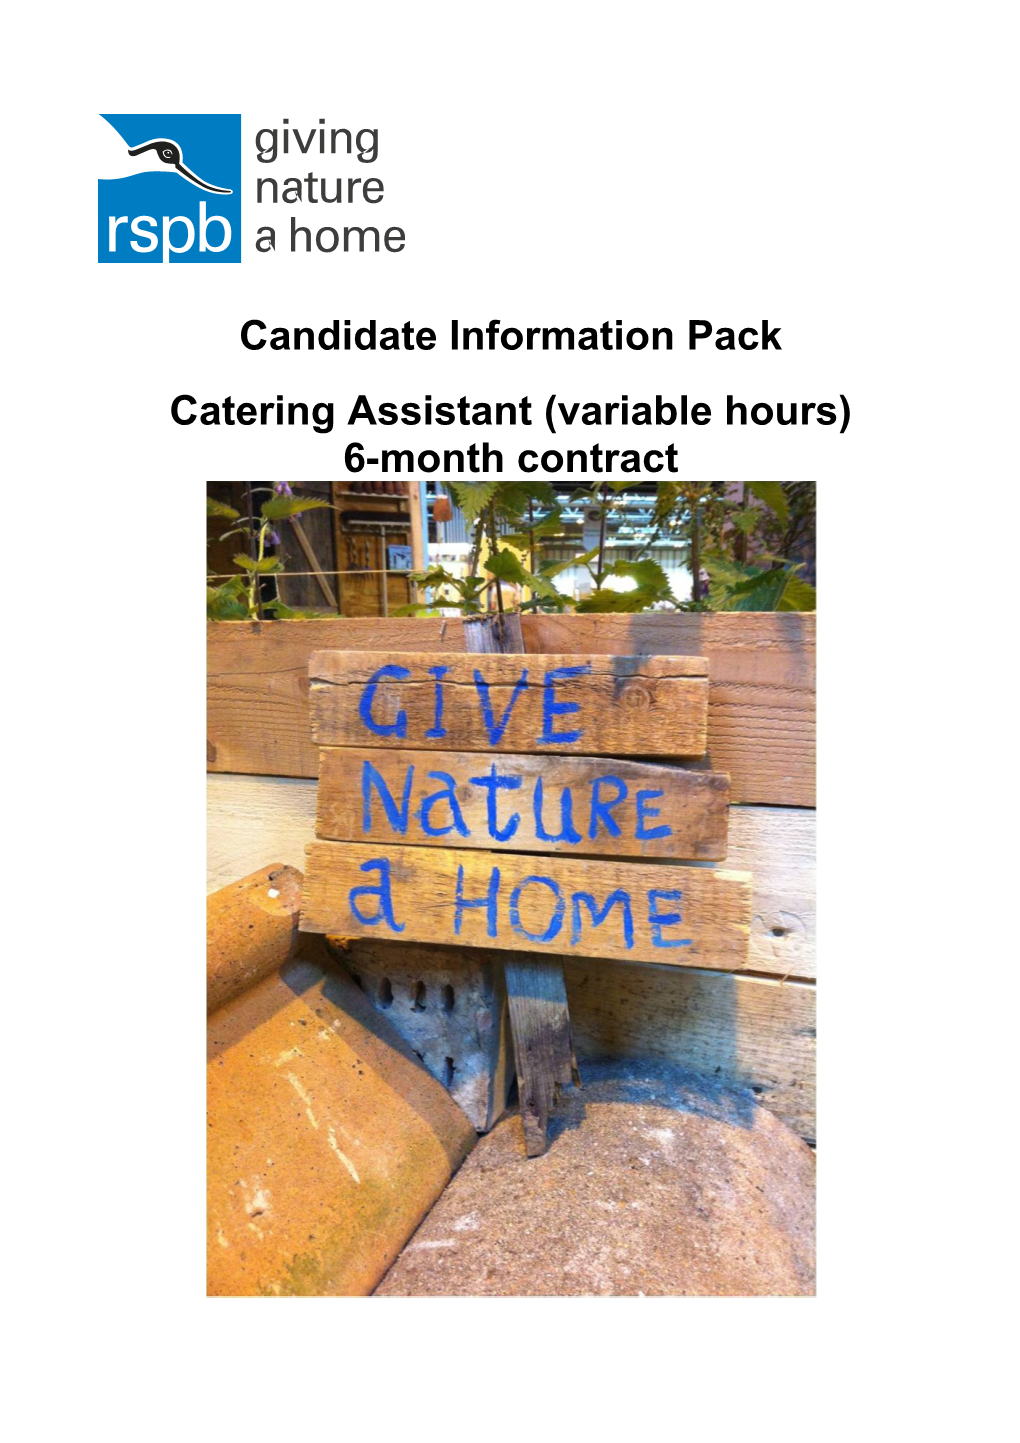 Candidate Information Pack Catering Assistant (Variable Hours)